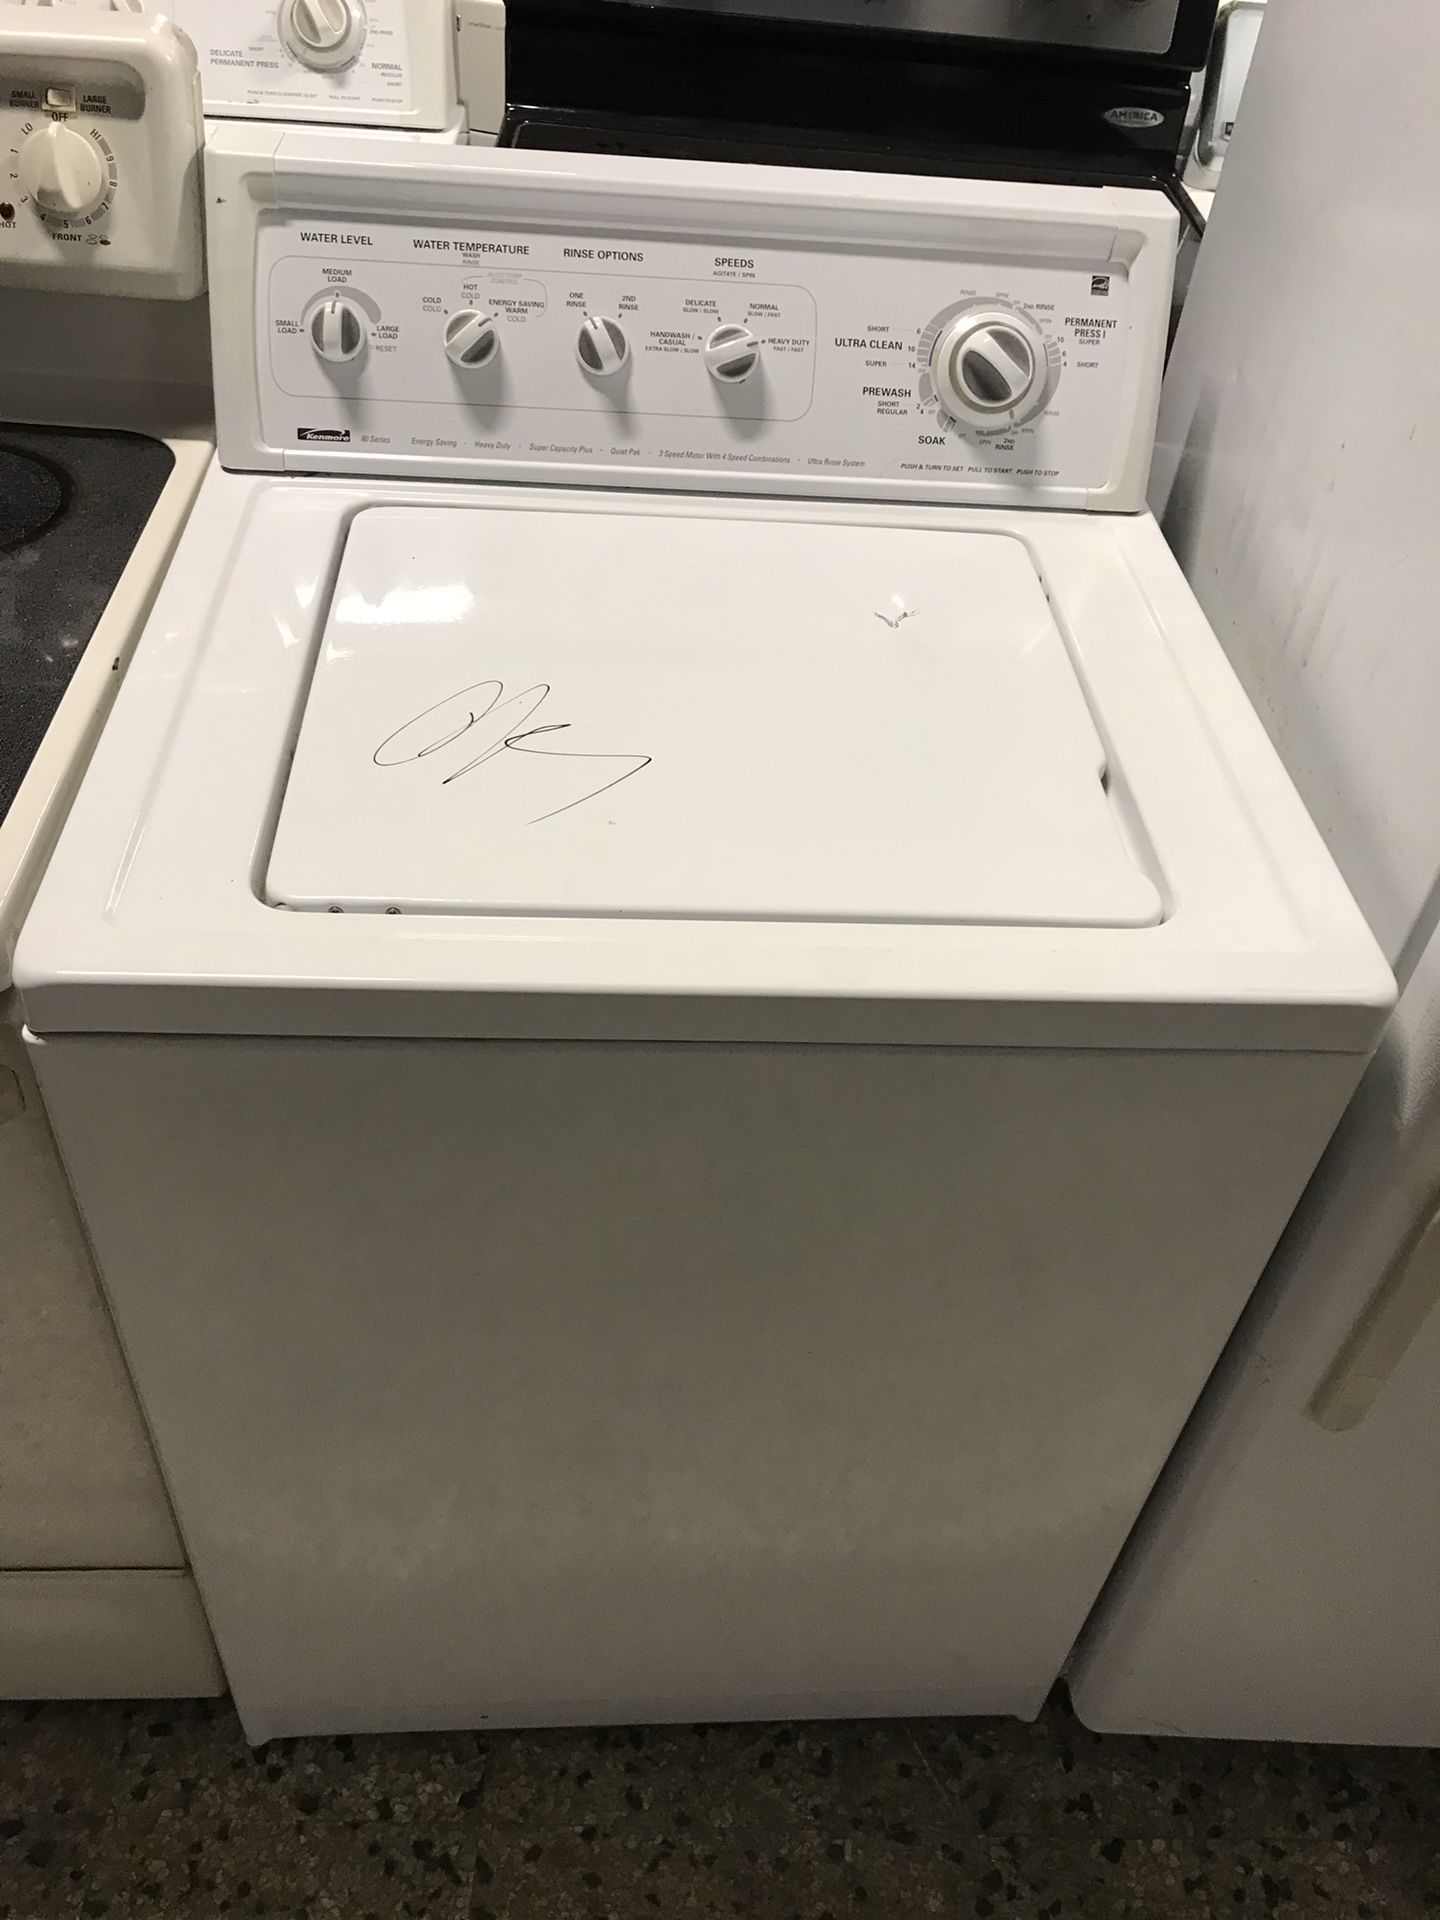 Kenmore brand refurbished top washer works great.